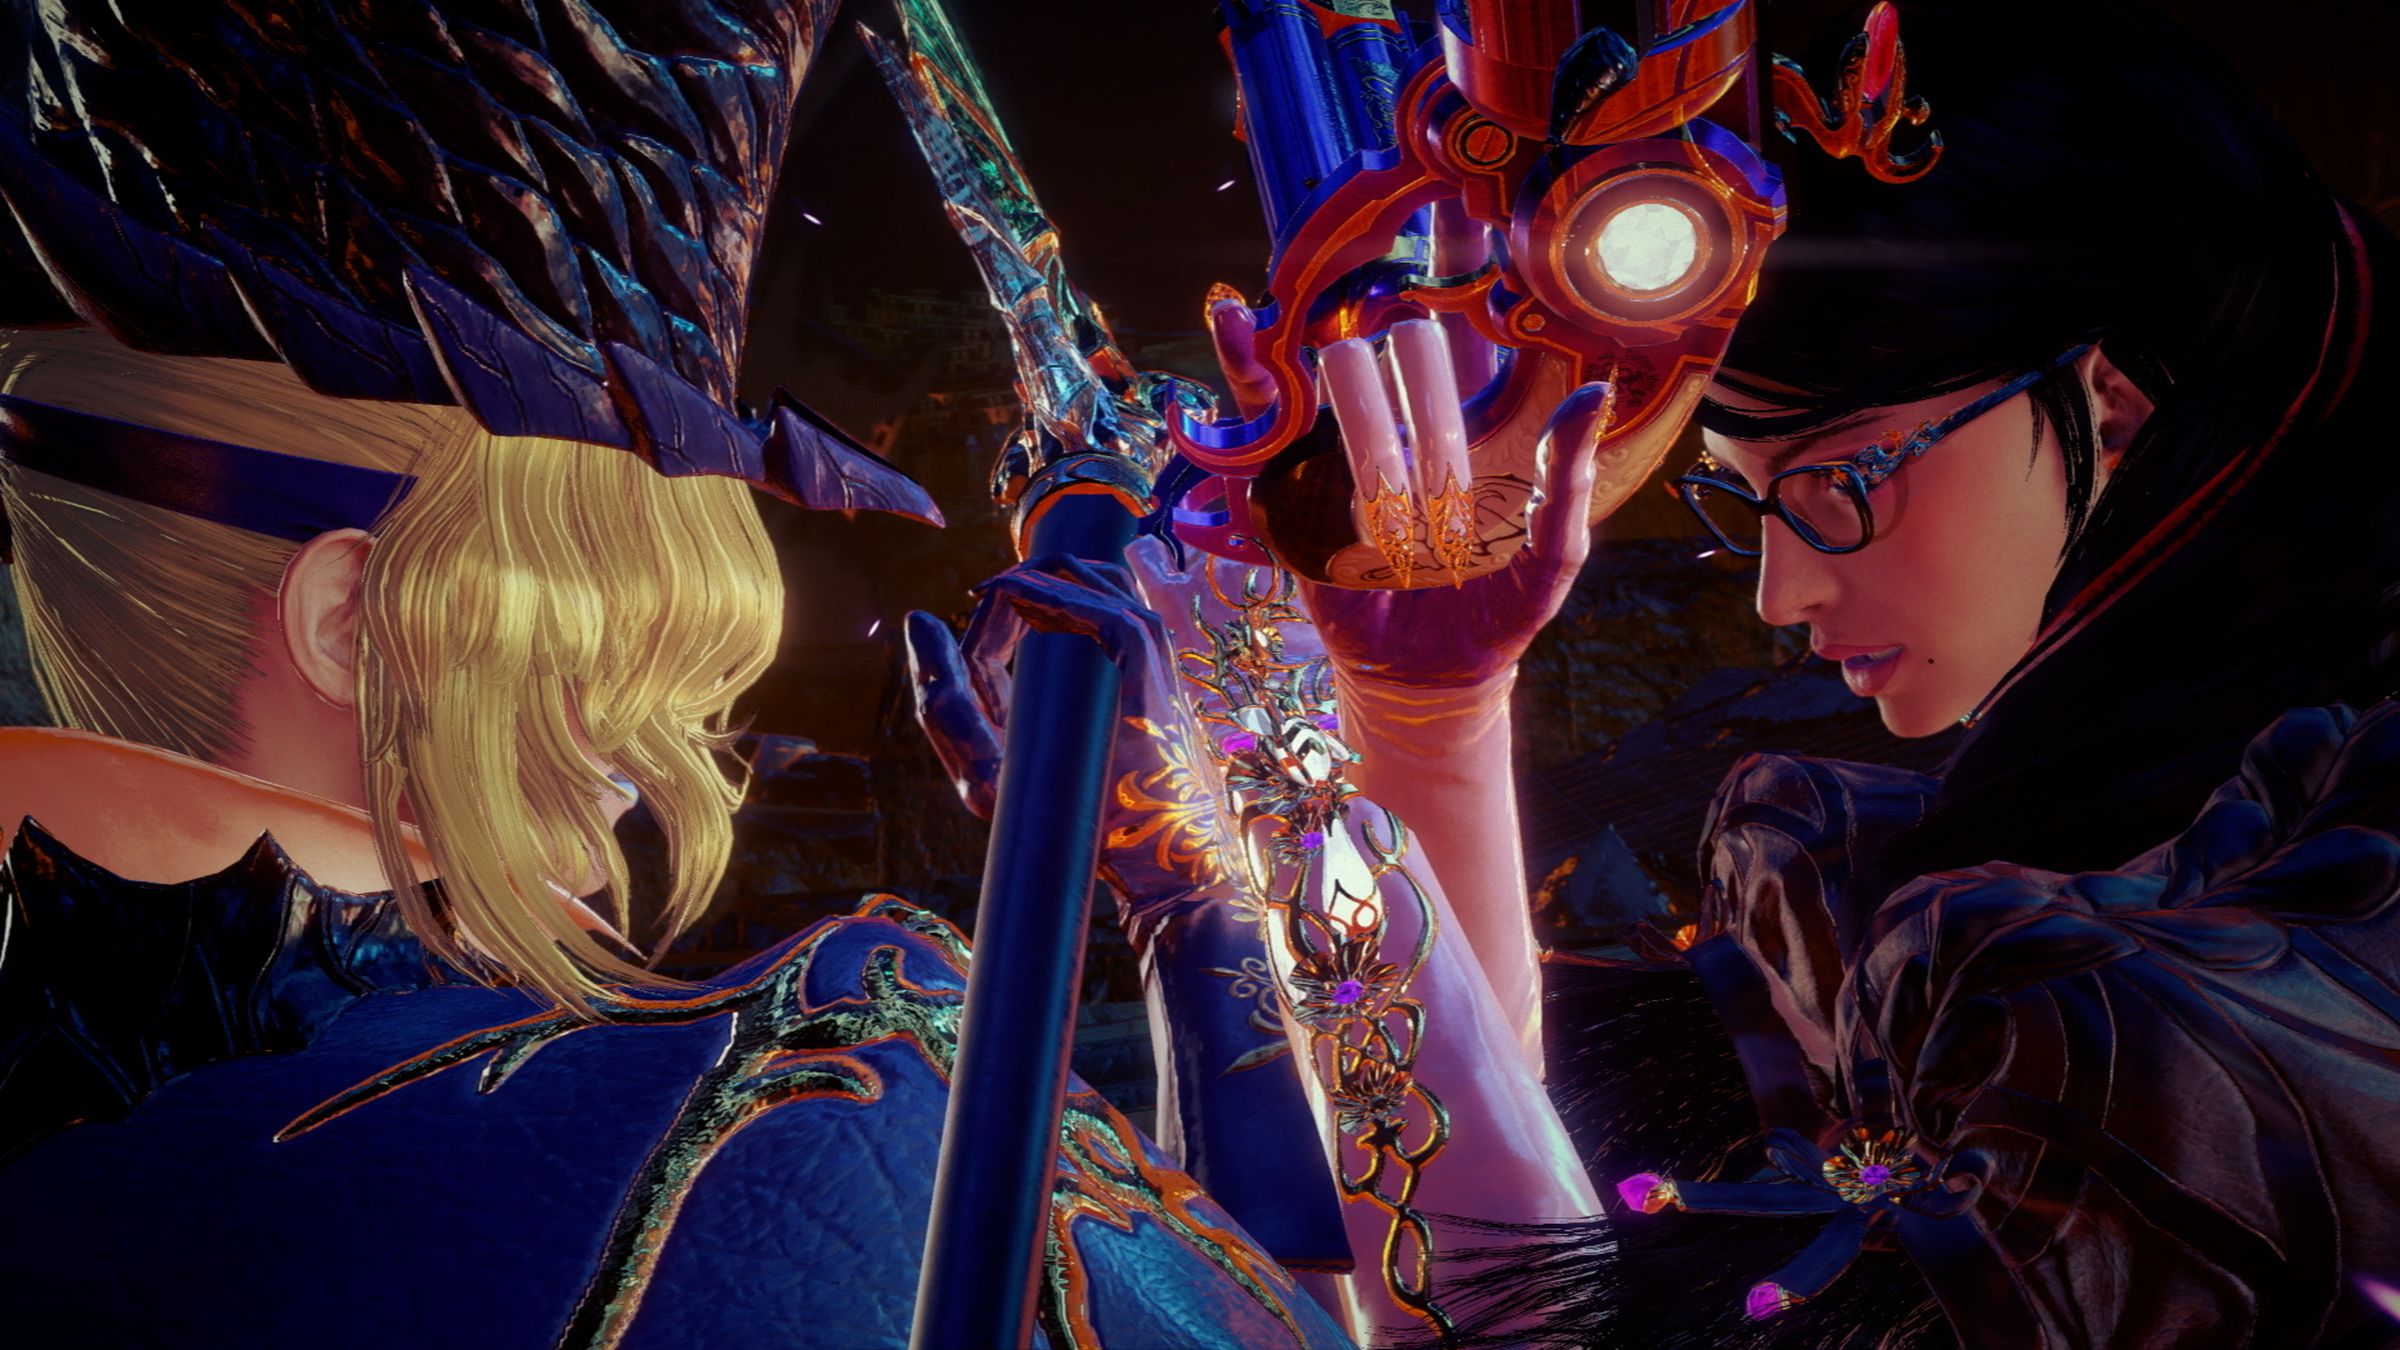 Meeting Bayonetta’s parallel universe counterparts featured the best, most creative moments of the game.